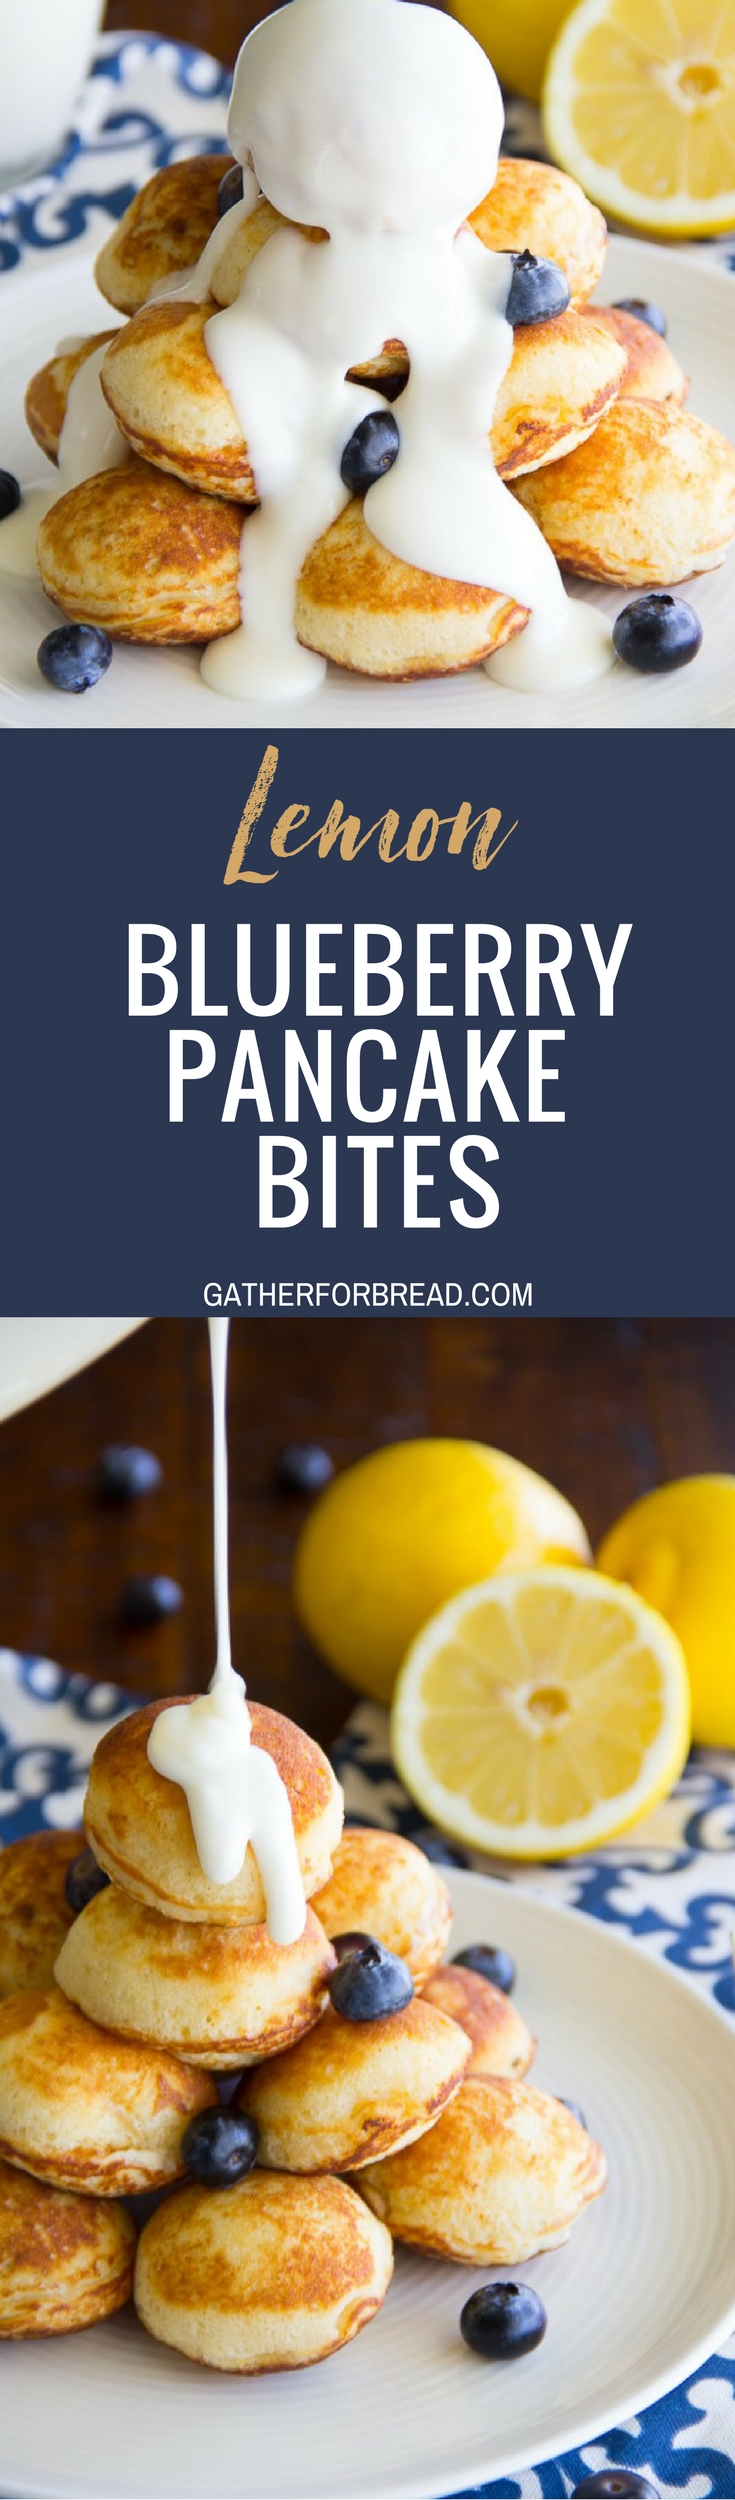 Lemon Blueberry Pancake Bites - Lemon blueberry pancake poppers, made these from scratch. These little poppers make the perfect easy breakfast recipe.